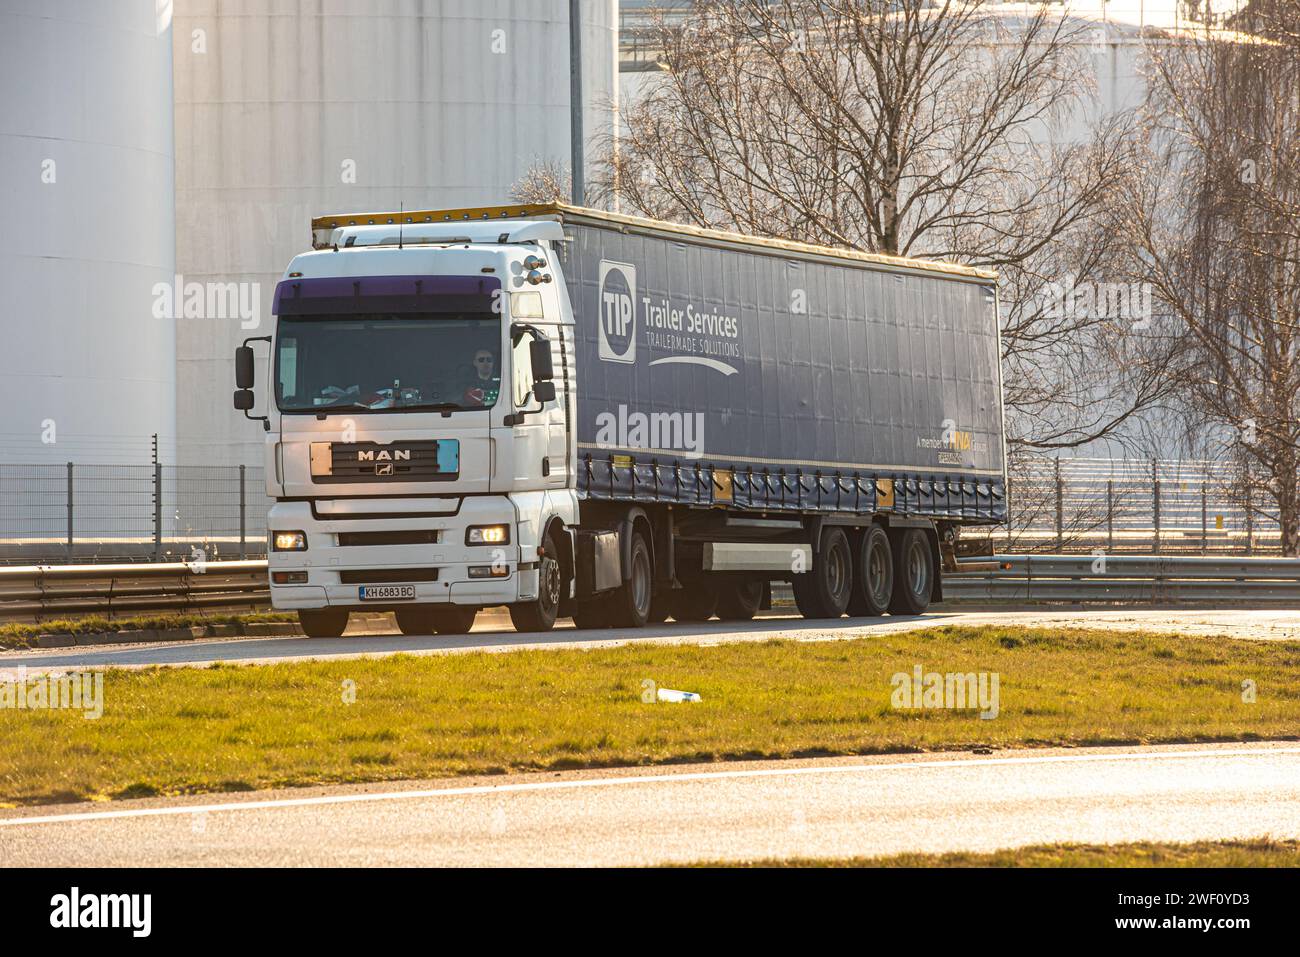 Gothenburg, Sweden - March 26 2020: White MAN TGA truck with a TIP trailer. Stock Photo